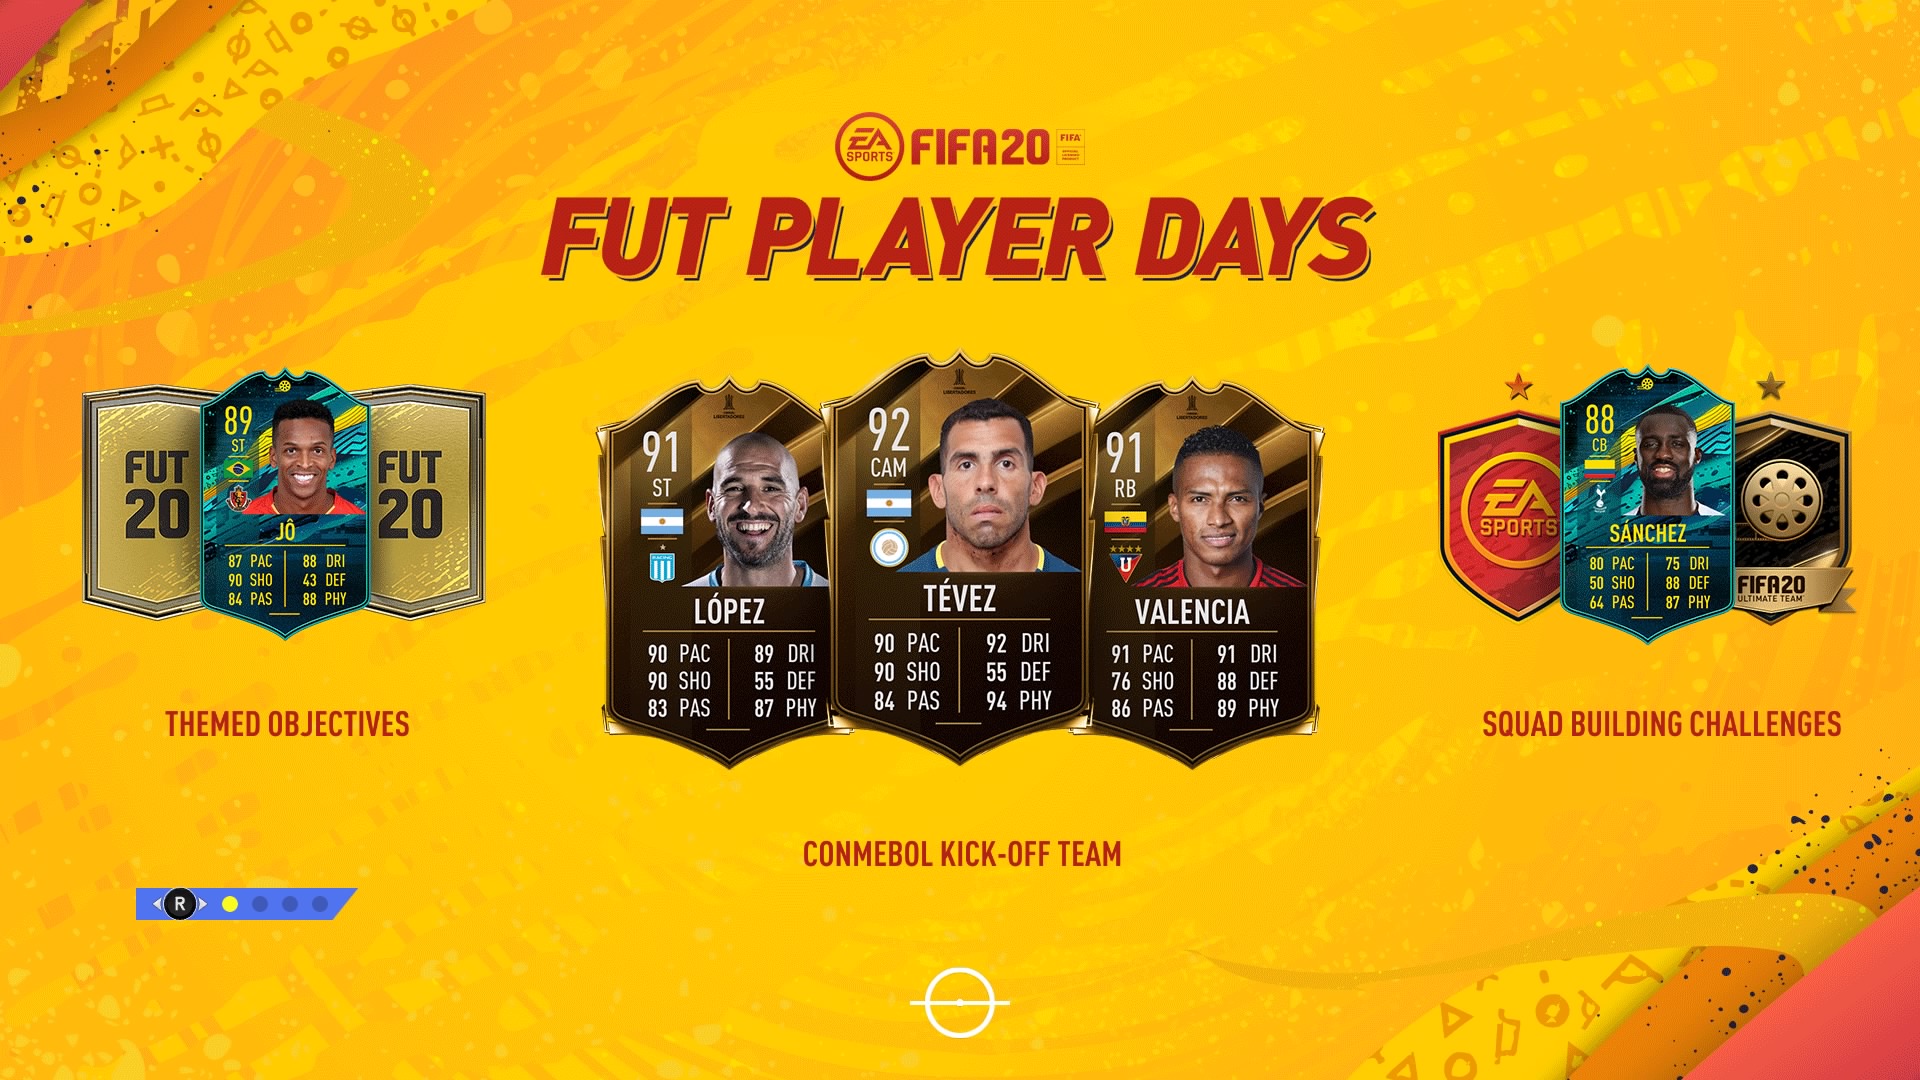 FIFA 20 FUT Player Days guide: how to get free packs and upgrades of Tevez  and Davinson Sanchez | GamesRadar+